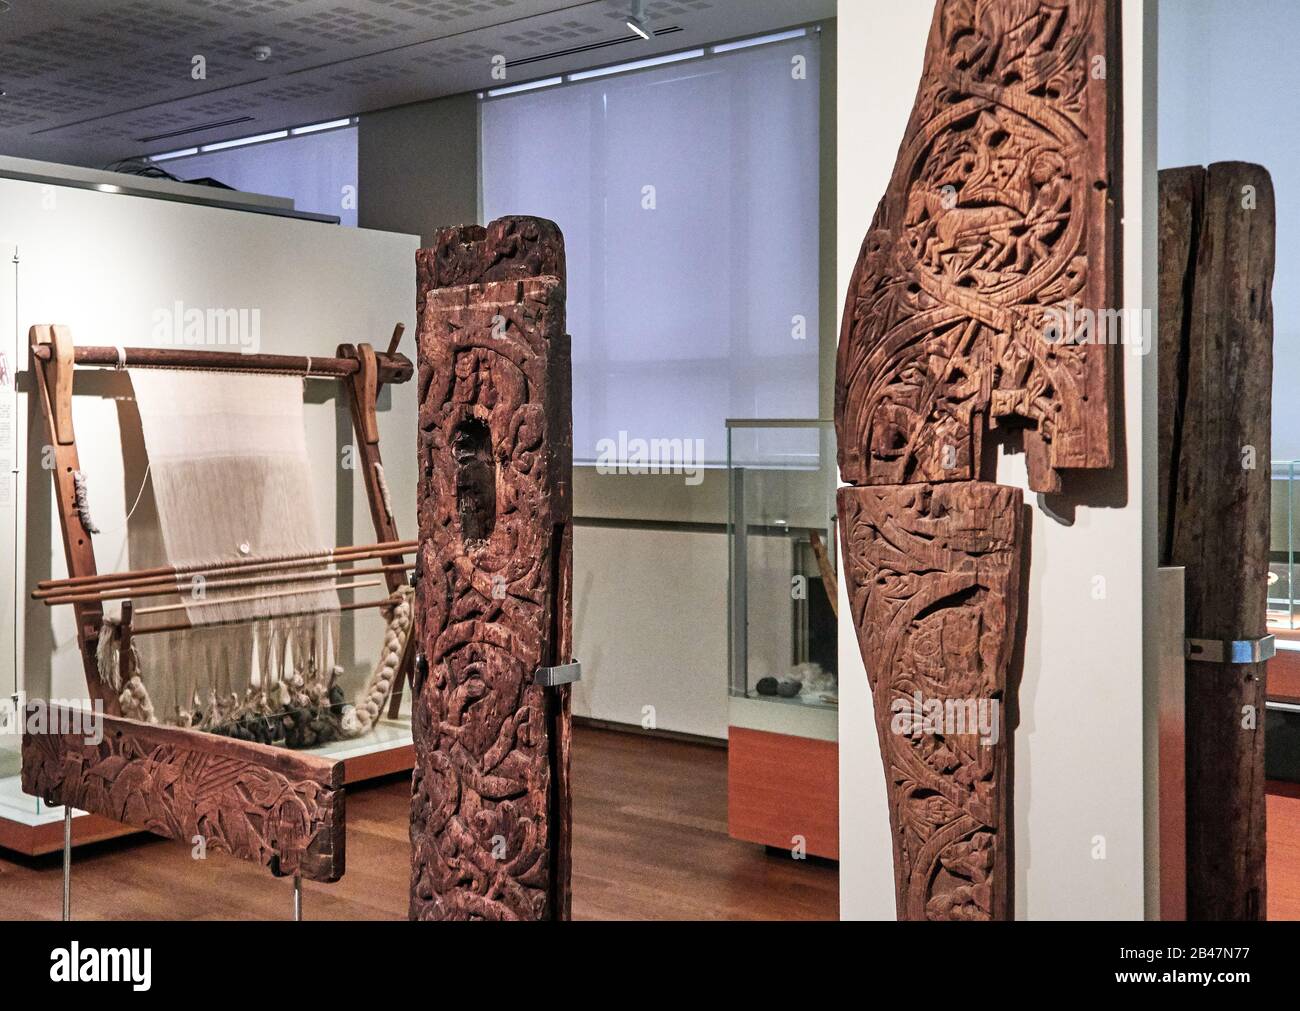 Reykjavik, The National Museum of Iceland, part of old church doors, mixture of paganism and the beginnings of Christianity in wood carving Stock Photo